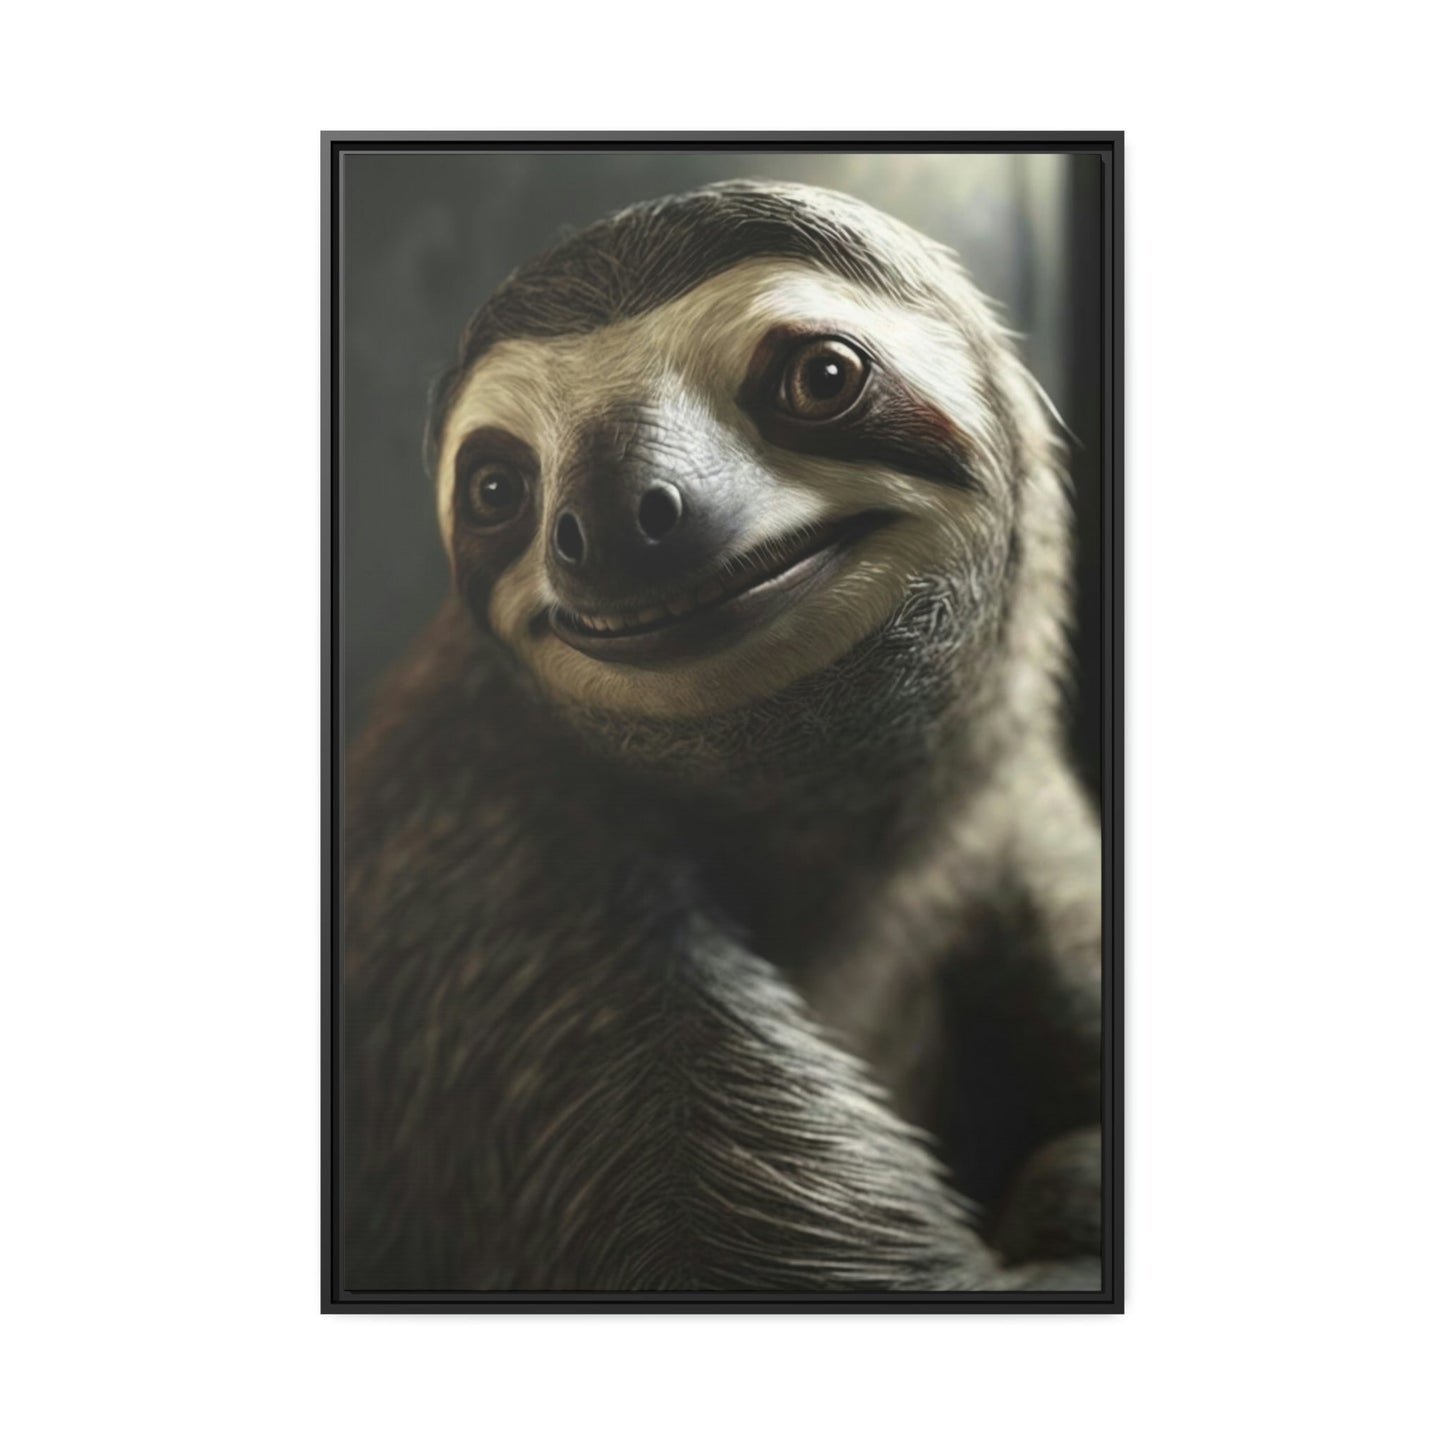 Slow and Steady: A Slothful Journey